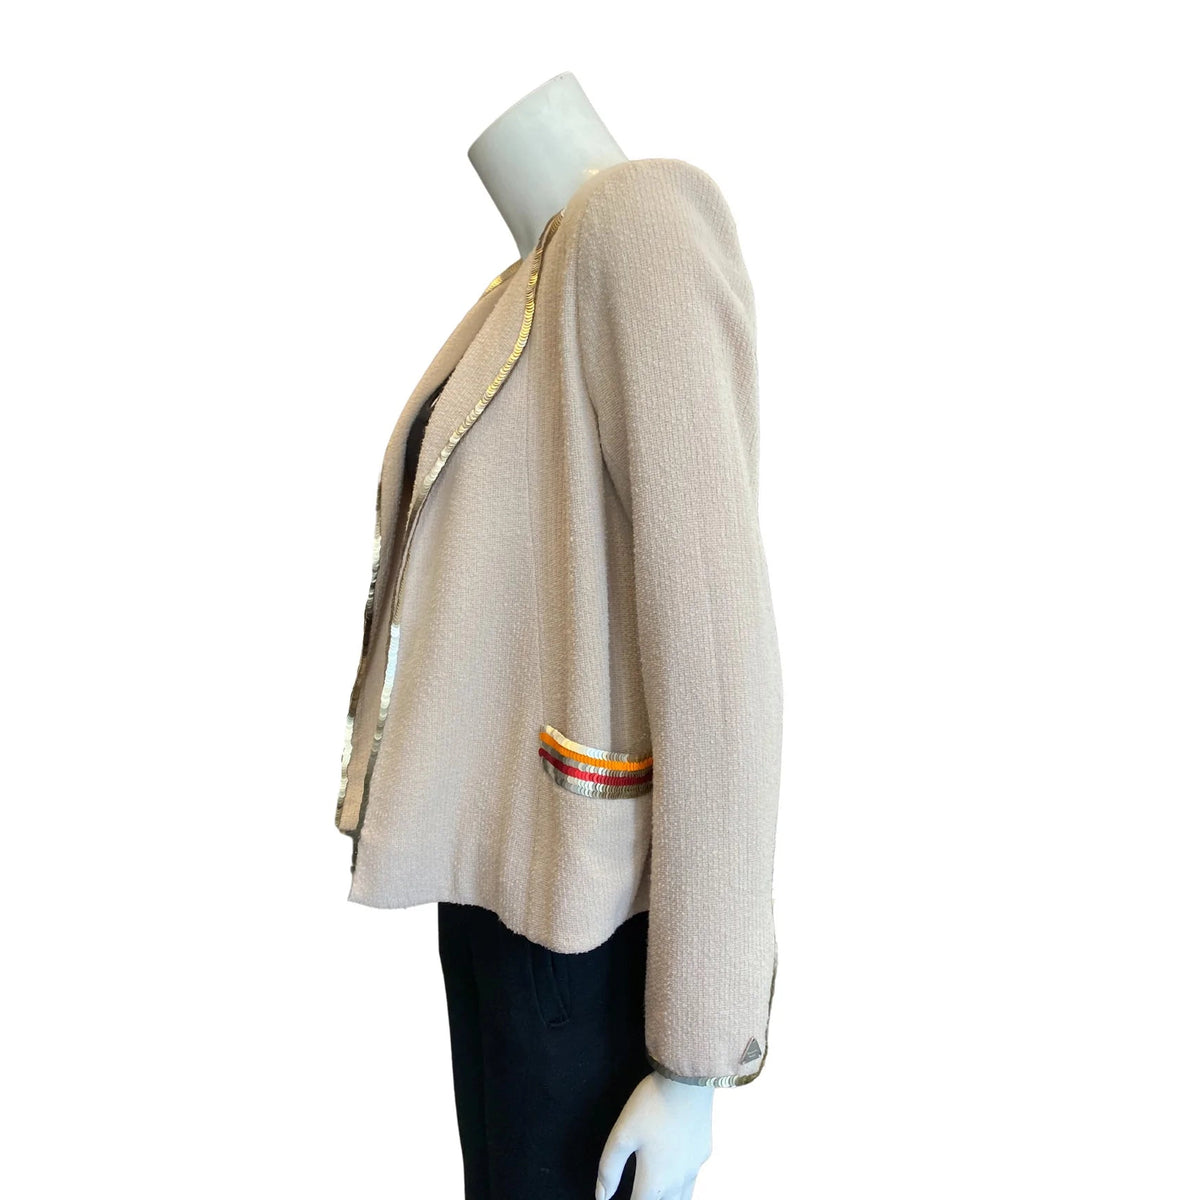 Pre-Owned CHANEL Cruise ’00 Wool Sequin Trim Blazer | Small - FR36 - US4 - theREMODA